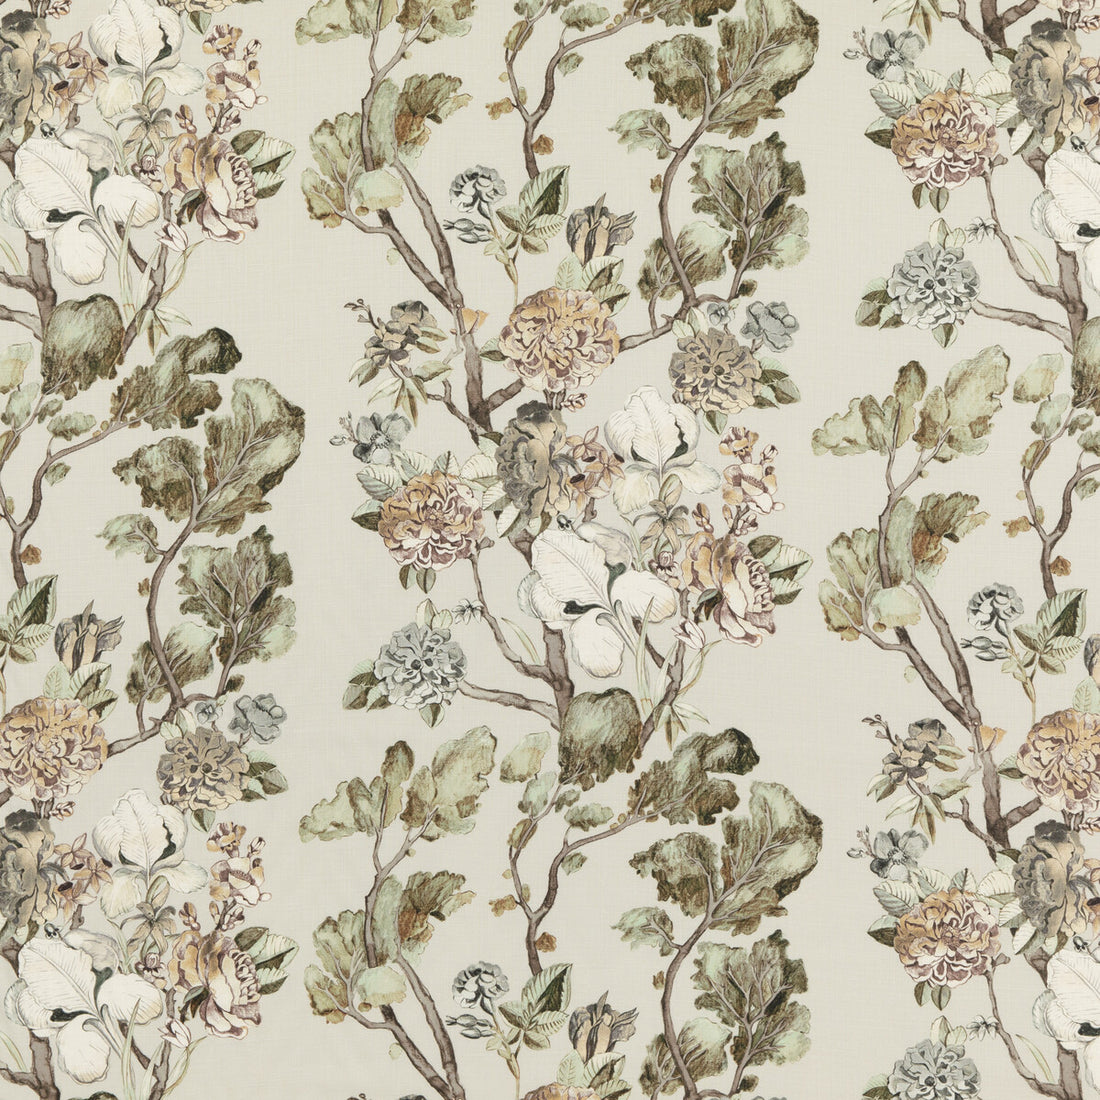 Wild Side fabric in sage color - pattern FD304.S108.0 - by Mulberry in the Modern Country II collection